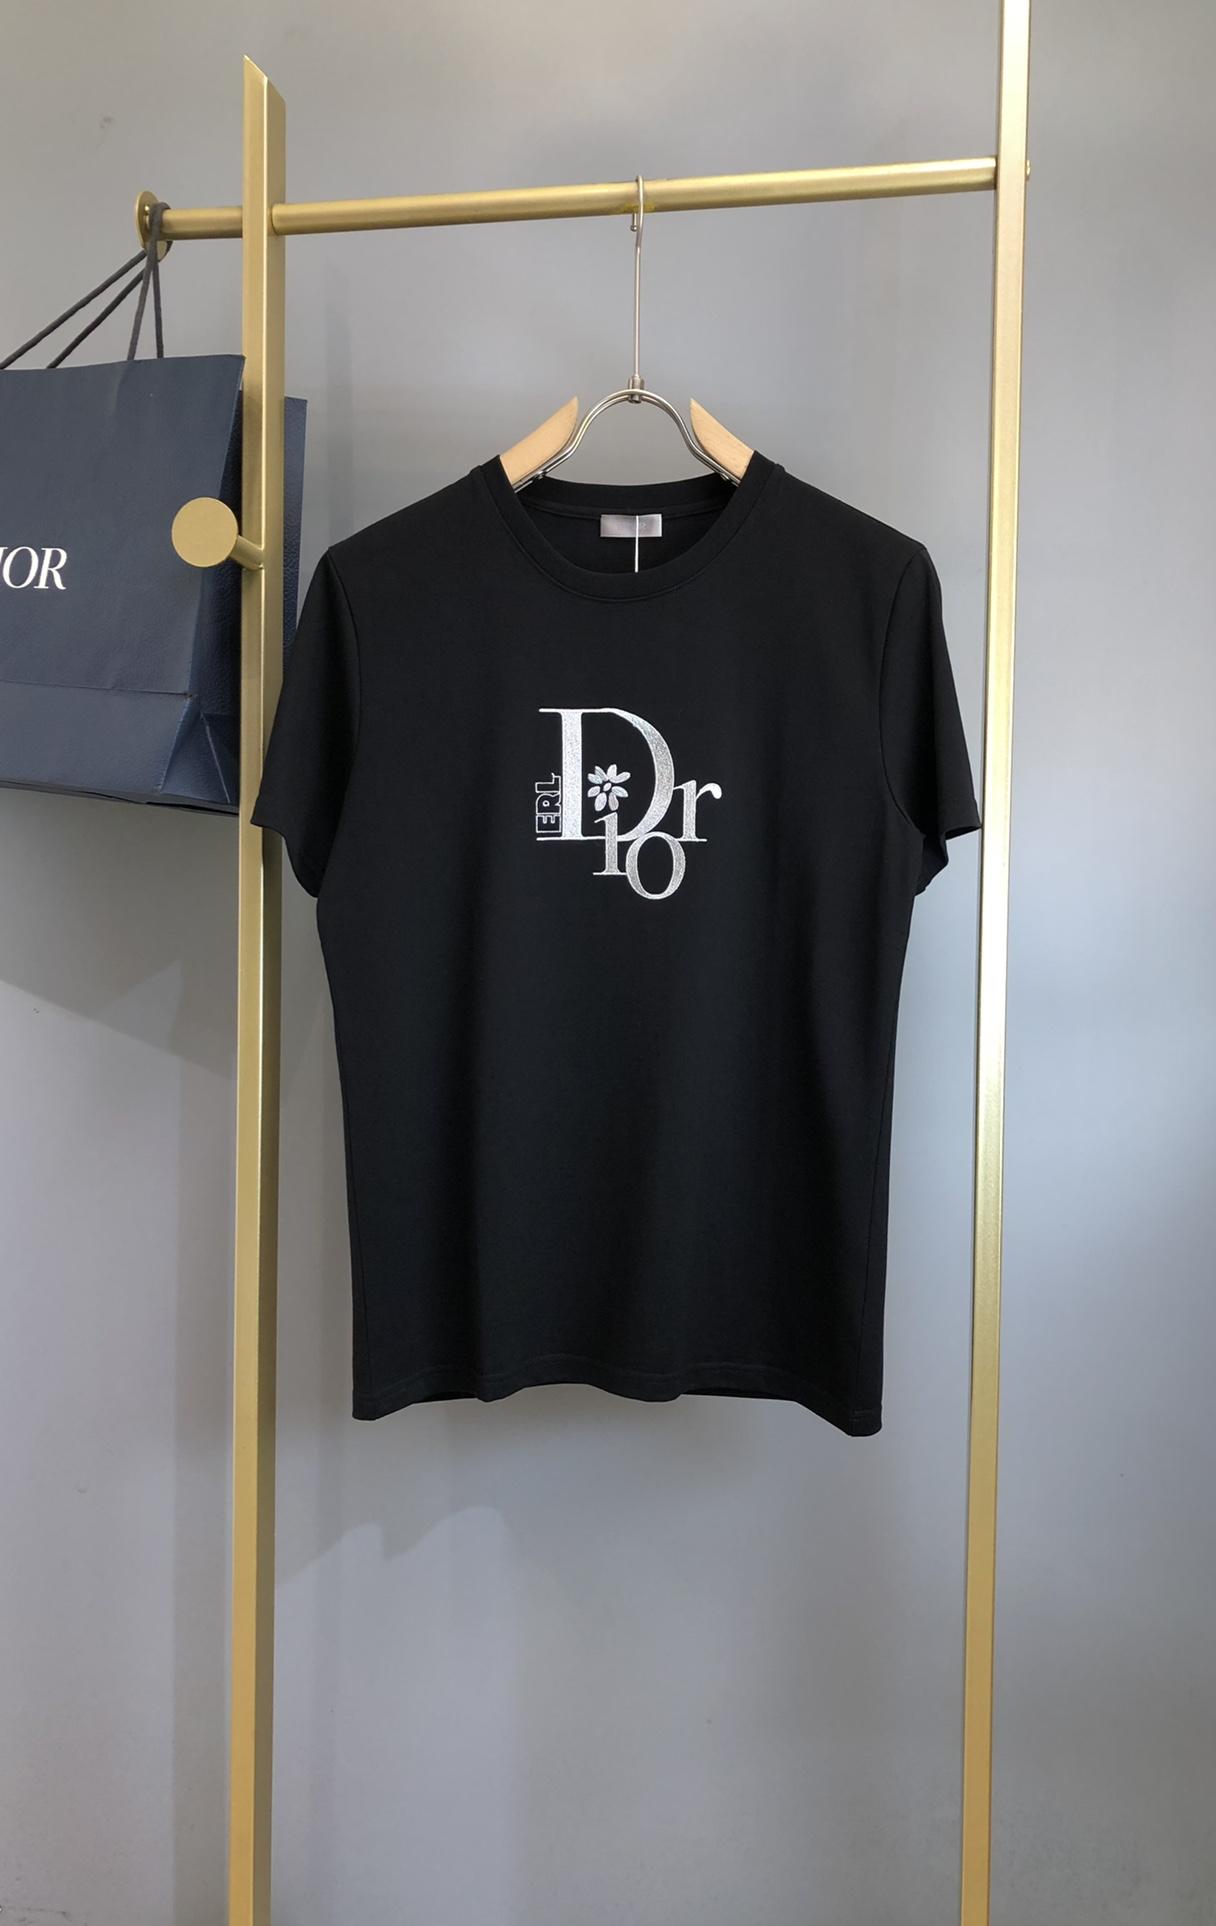 relaxed-fit-dior-by-erl-t-shirt-5989_16845011612-1000